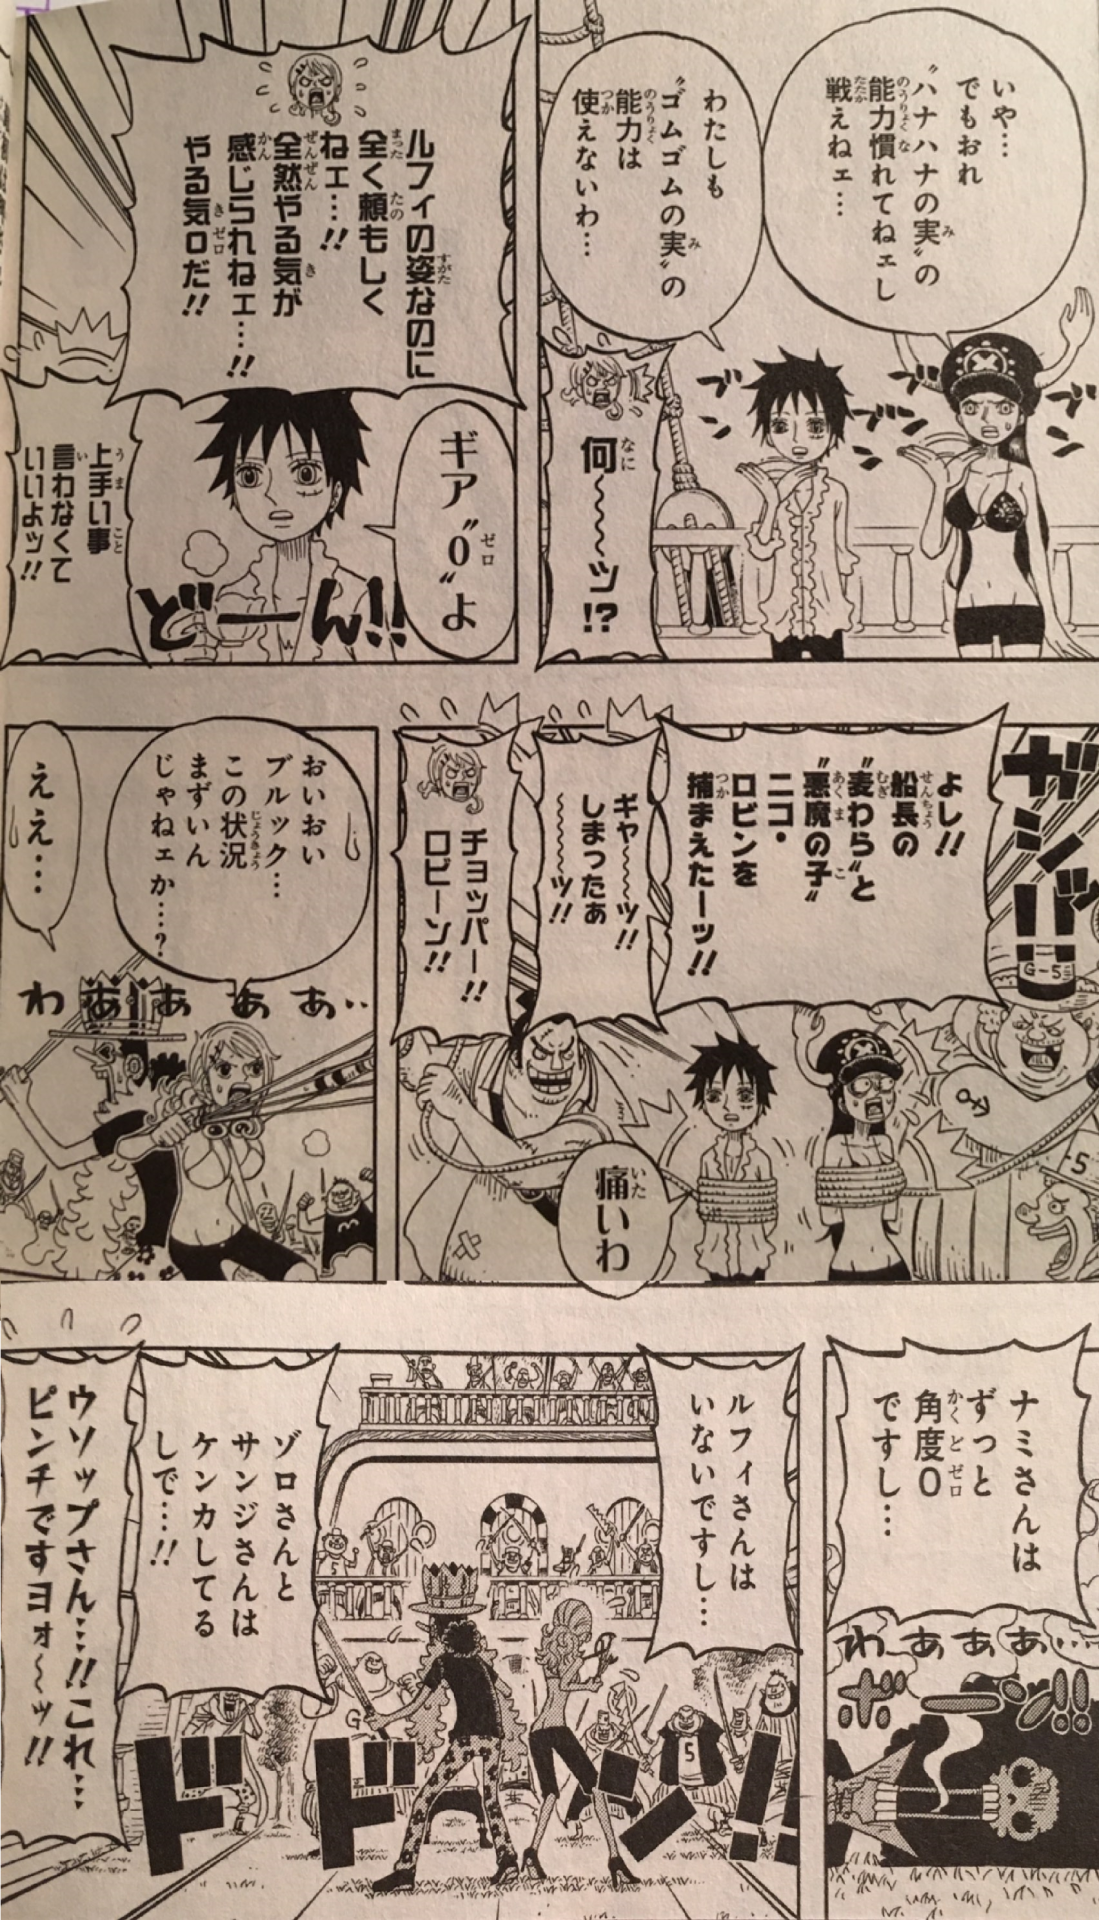 ONE PIECE PARTY Vol.3, Fifth story Part 5/5 – Translation in progress